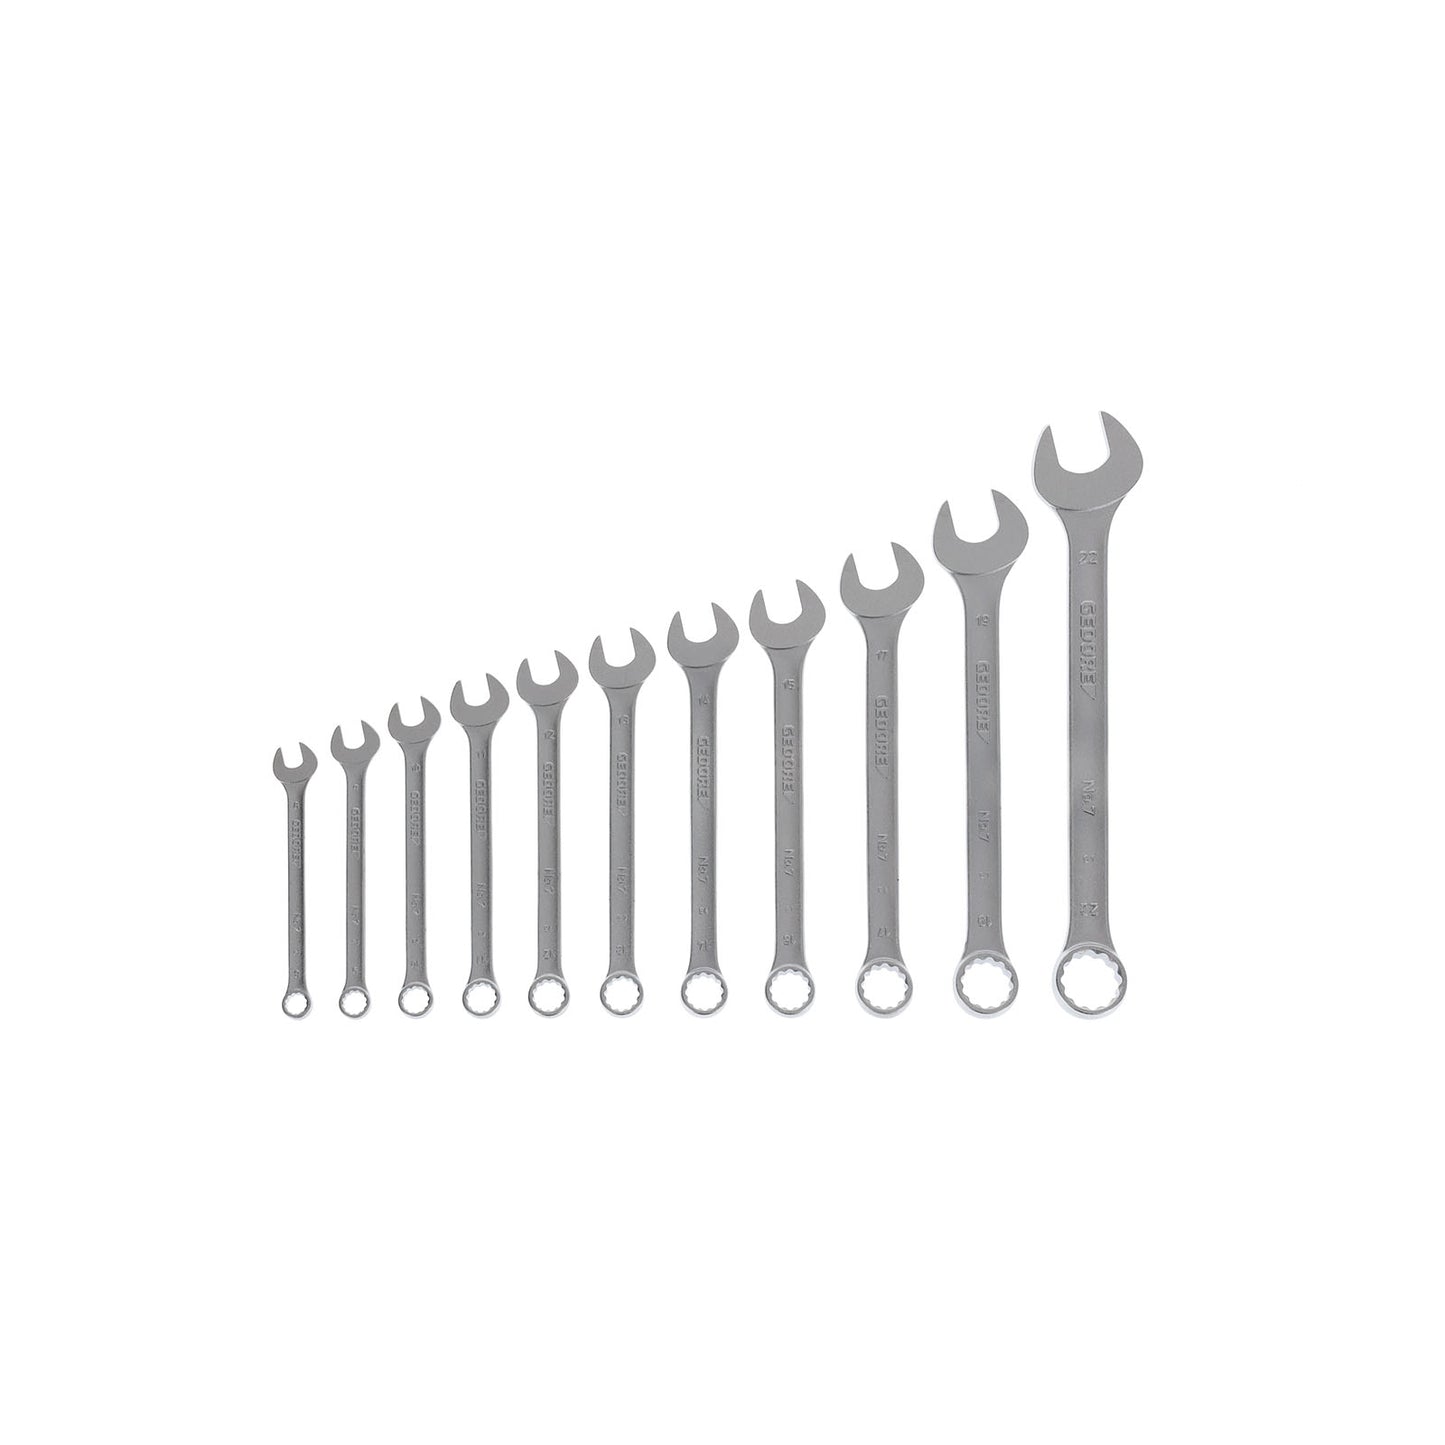 GEDORE 7-011 - Set of 11 Combination Wrenches (6093070)